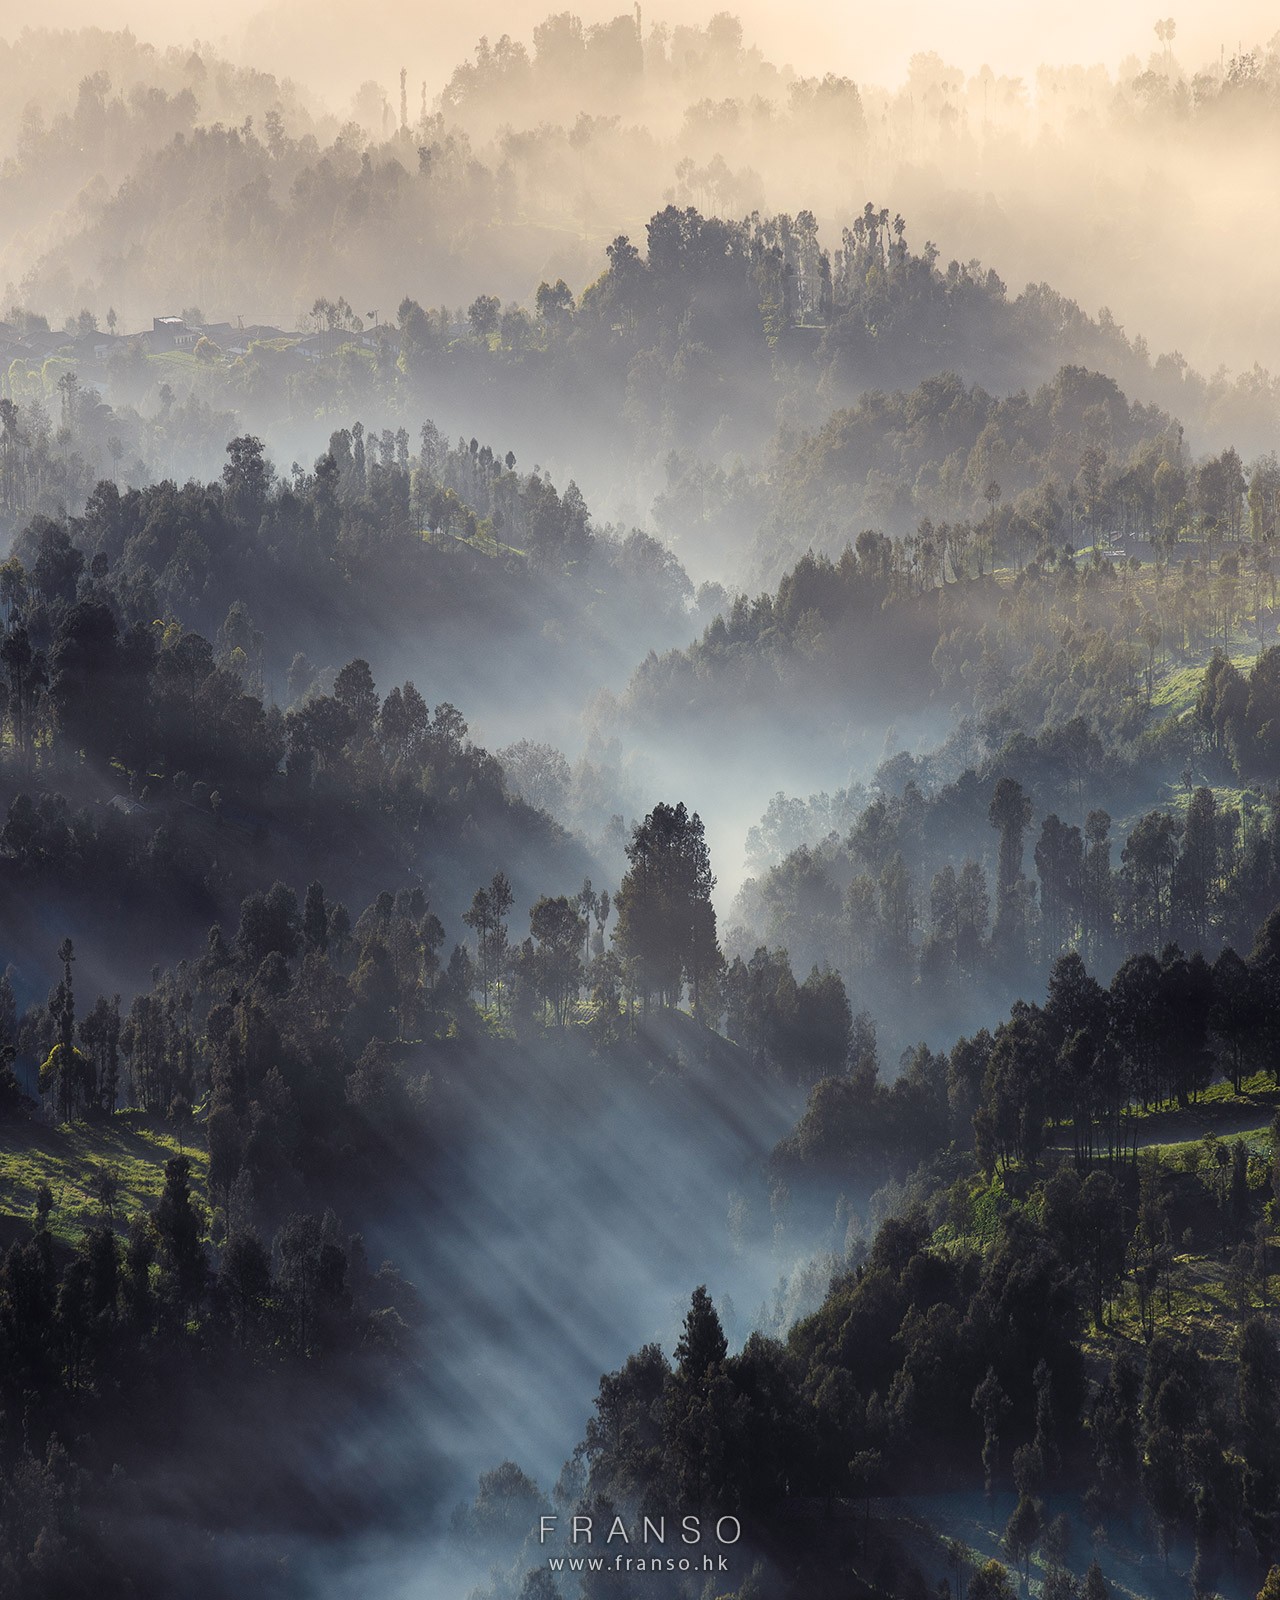 Landscape | Oversea | The mist and the forest  | 